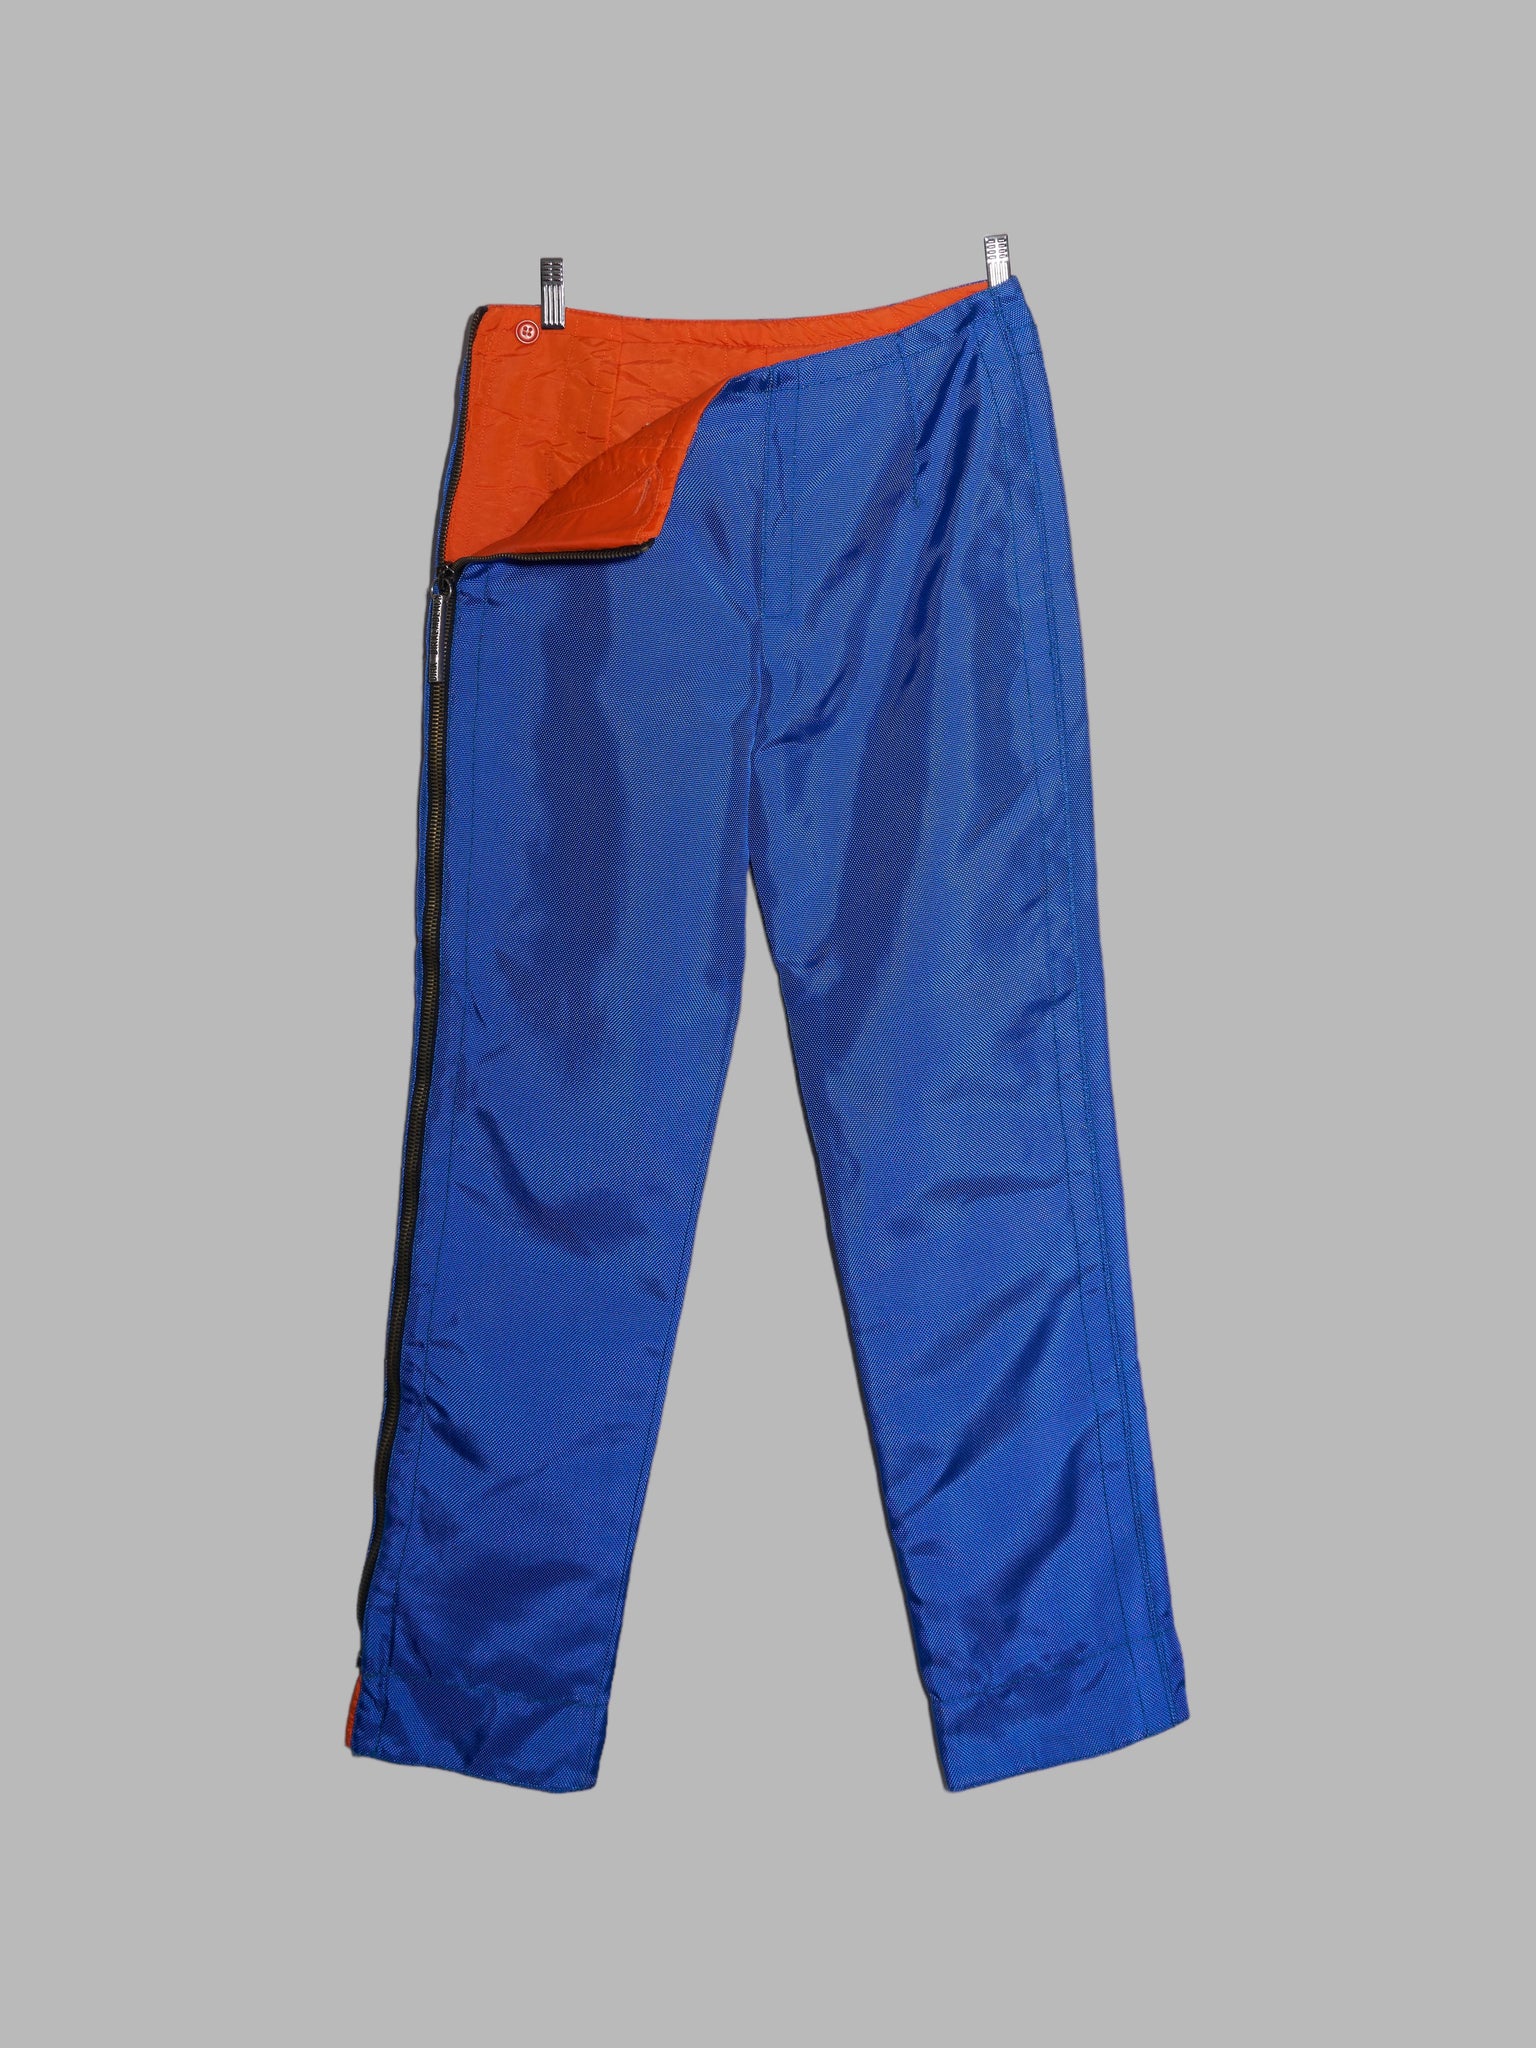 Dirk Bikkembergs Hommes 1990s electric blue ballistic nylon quilted side zip trousers